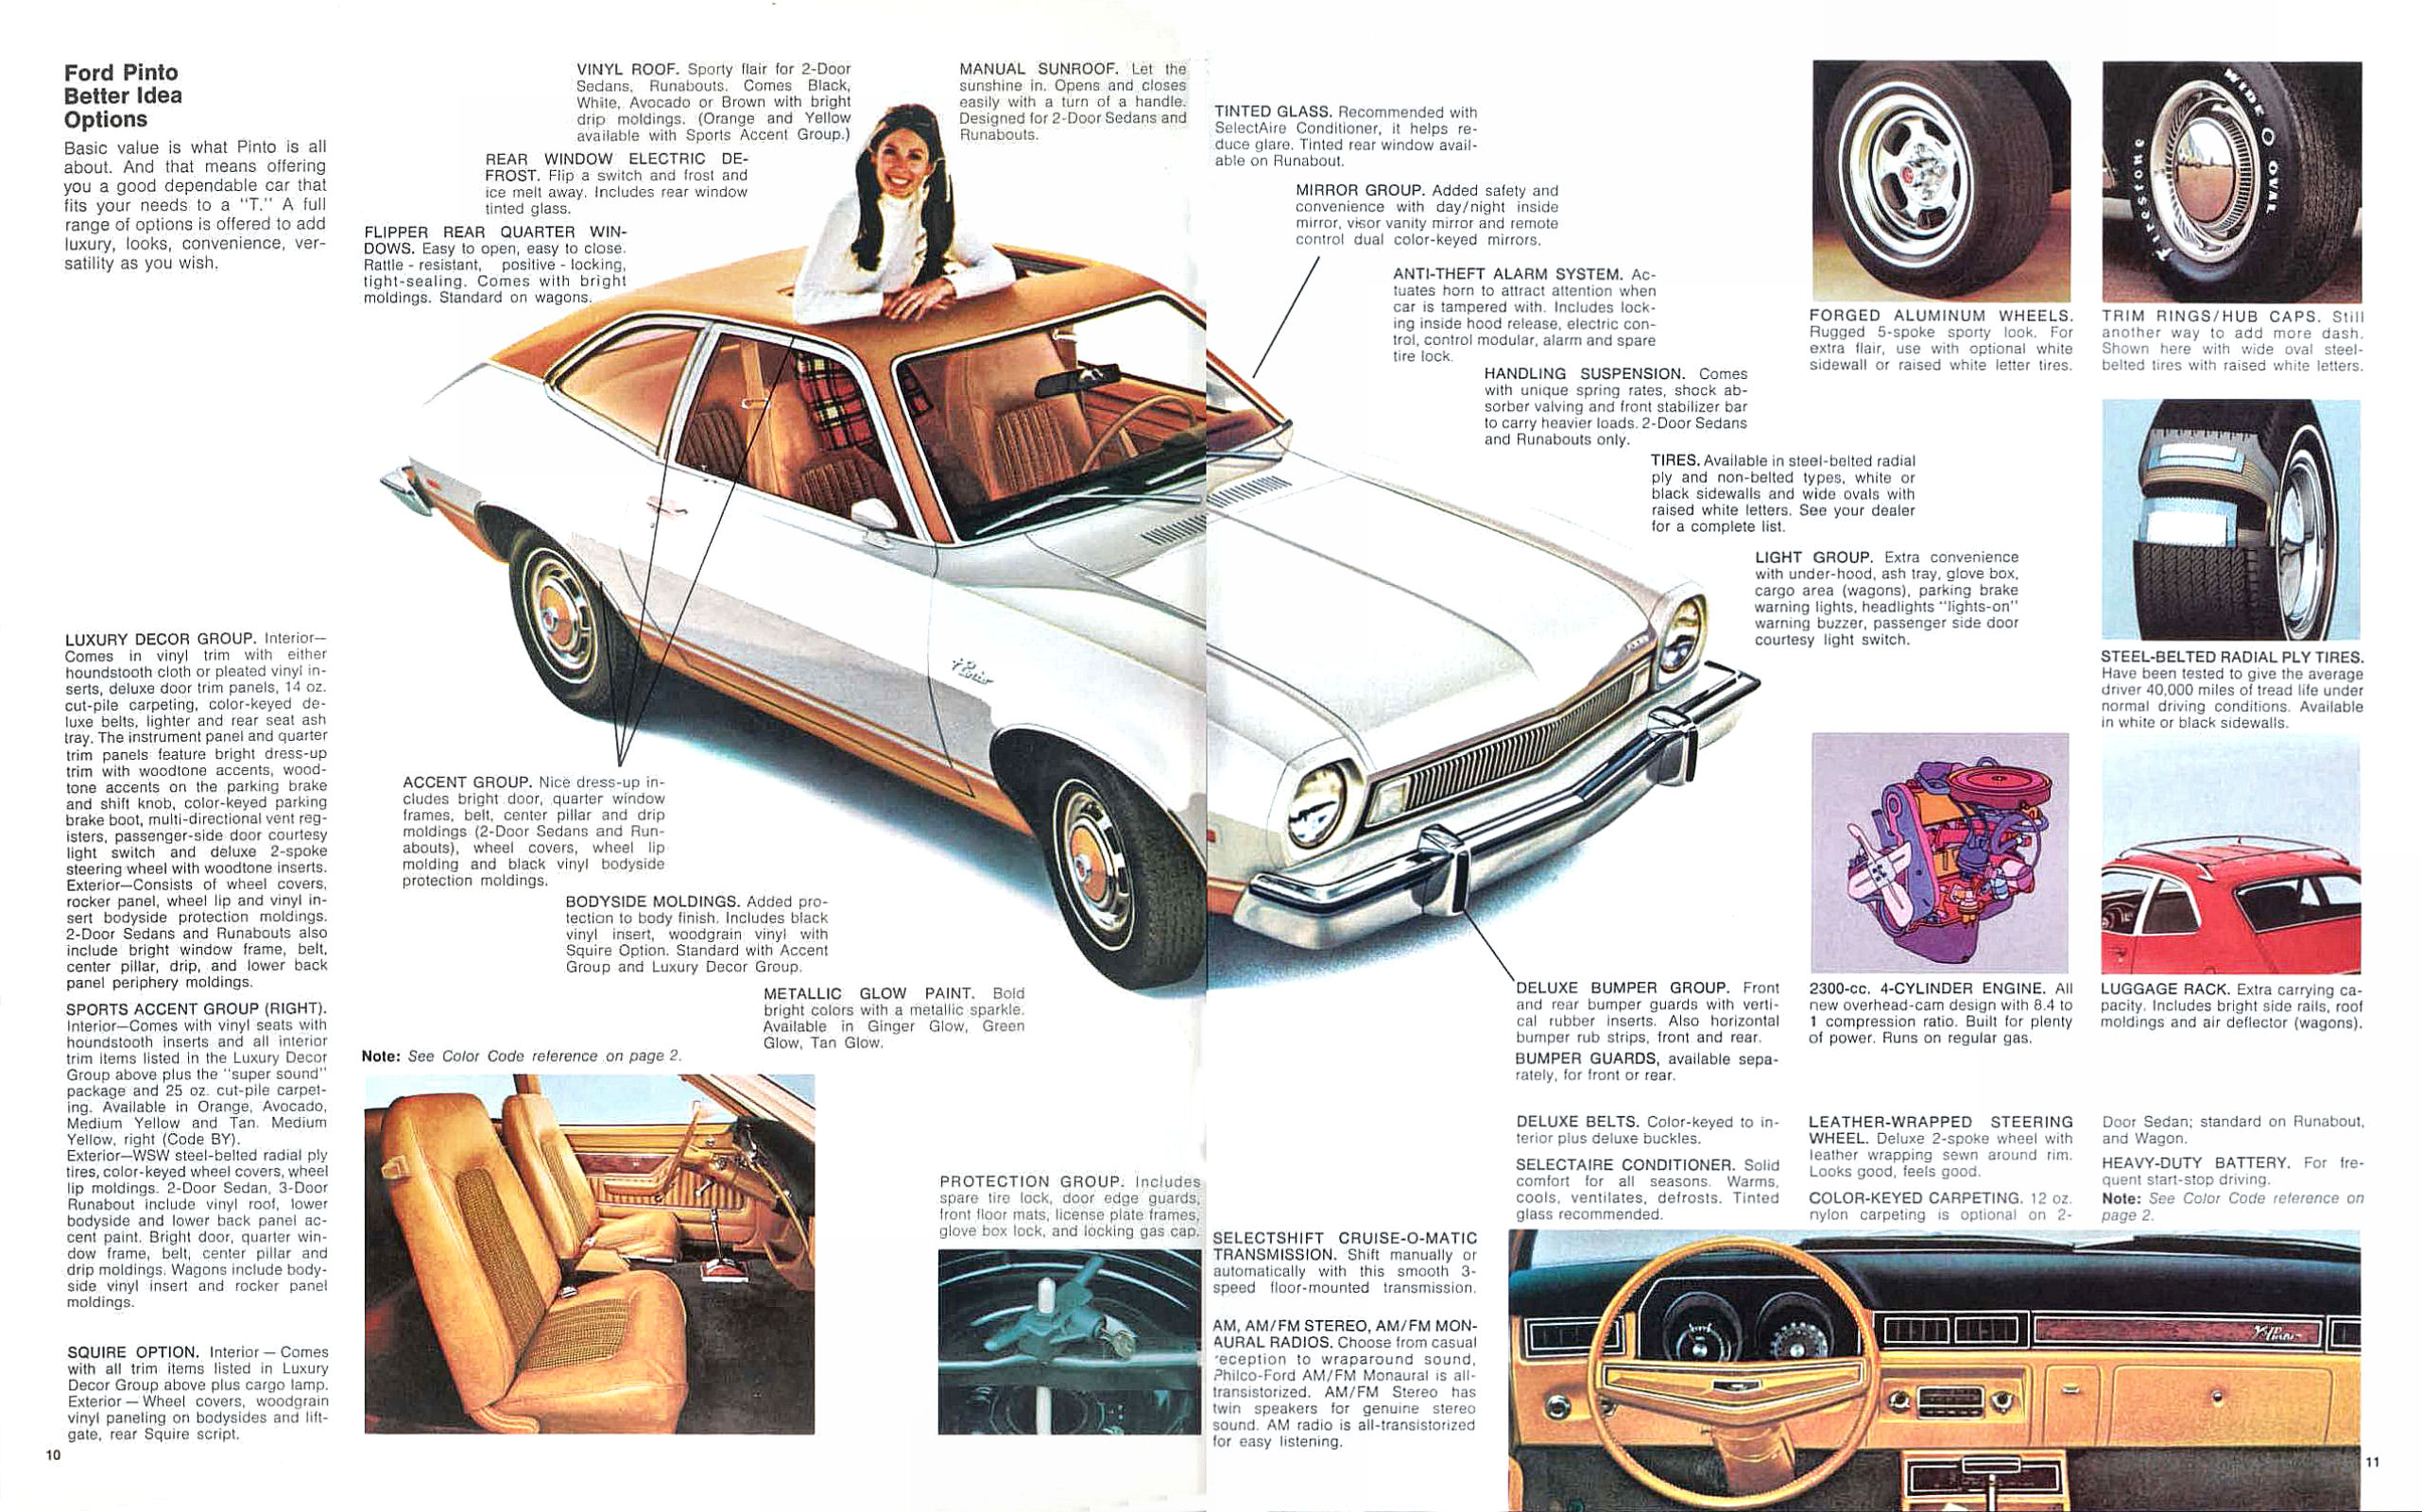 1974 Ford Pinto-10-11